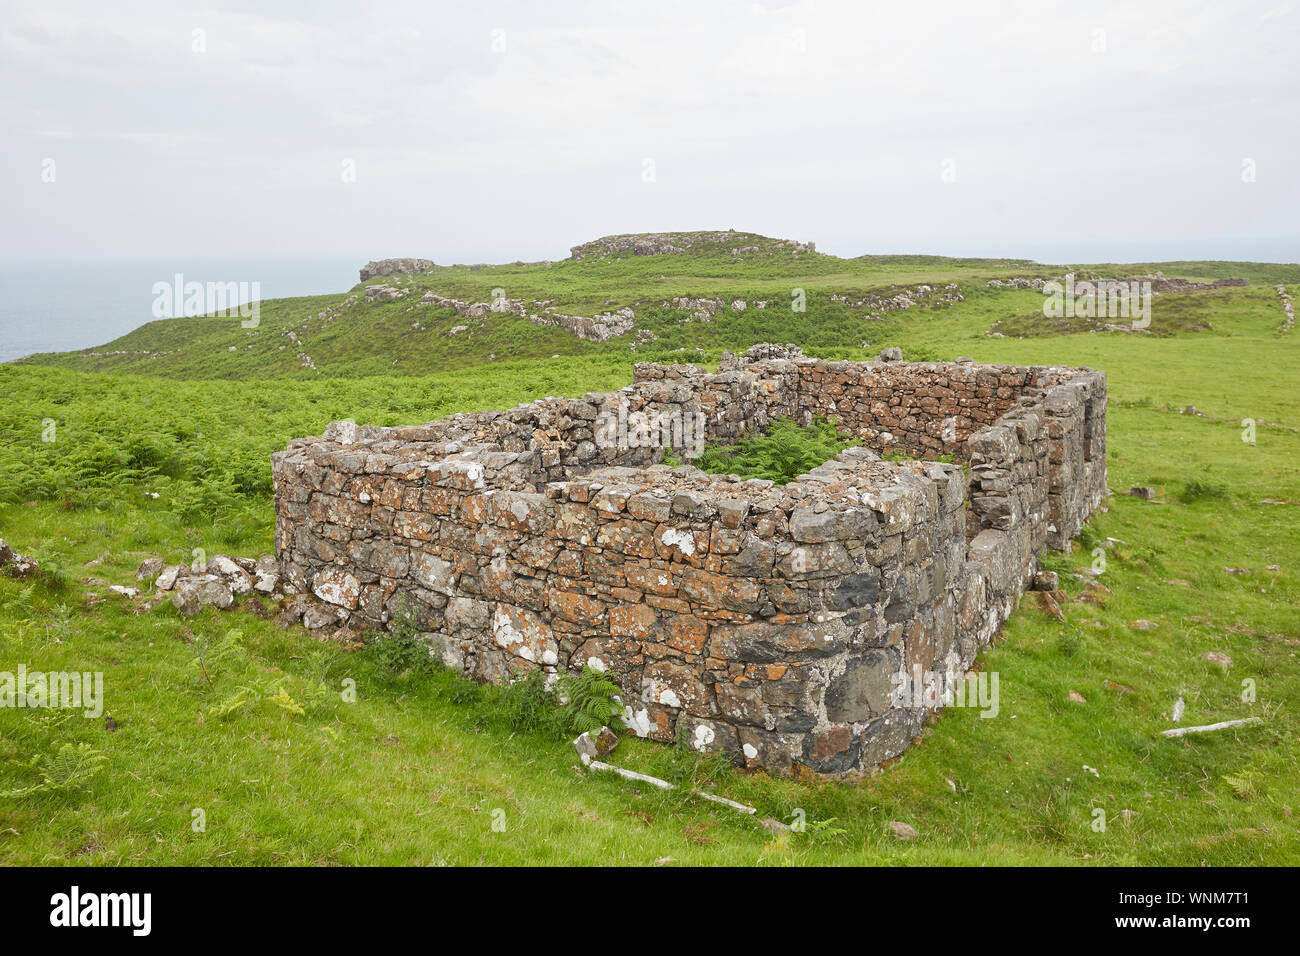 Remains of the old Sheilings at Rubha nan Oirean, Calgary Bay, Isle of Mull, Inner Hrbrides, Scotland, UK Stock Photo